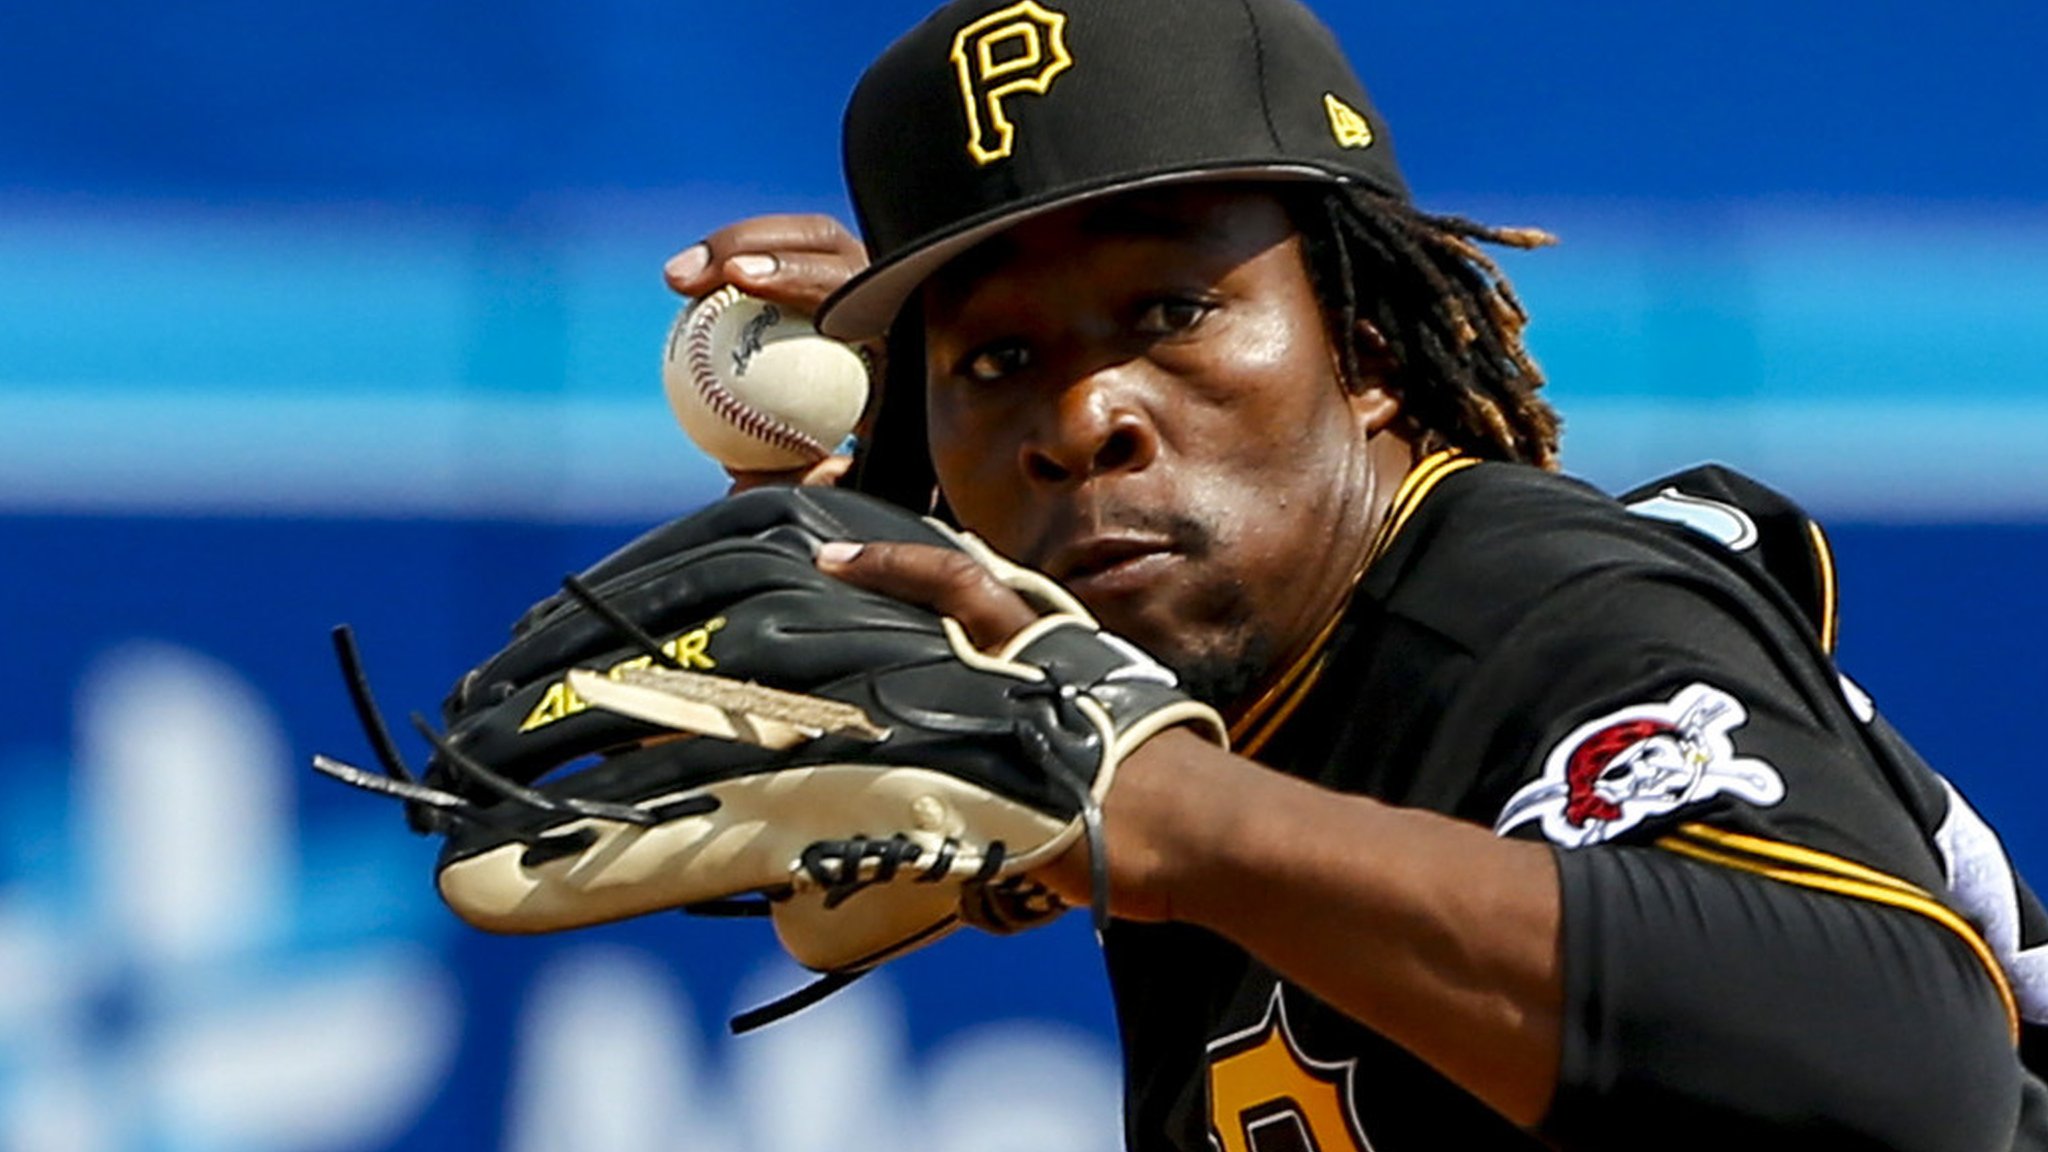 Pirates rookie Gift Ngoepe becomes first African-born player in MLB history